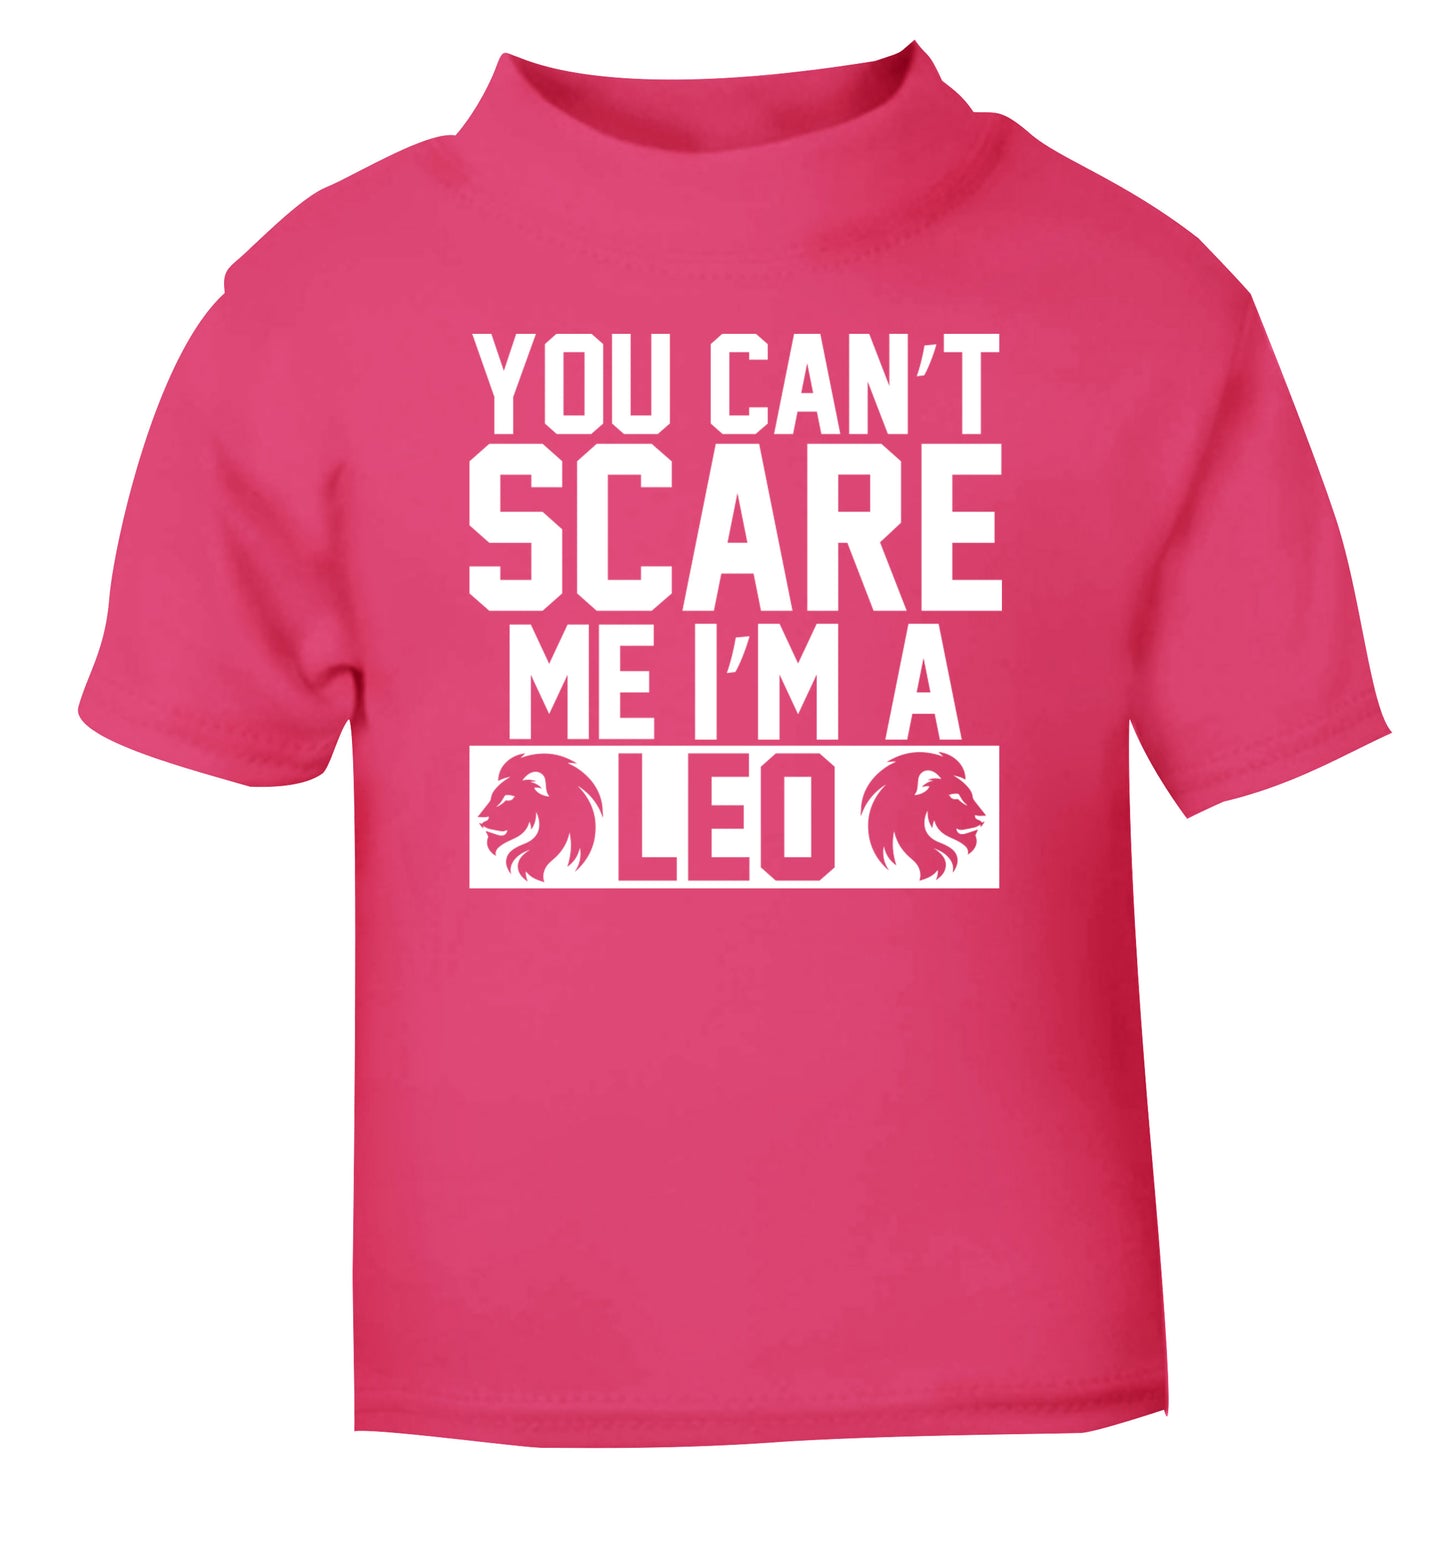 You can't scare me I'm a leo pink Baby Toddler Tshirt 2 Years